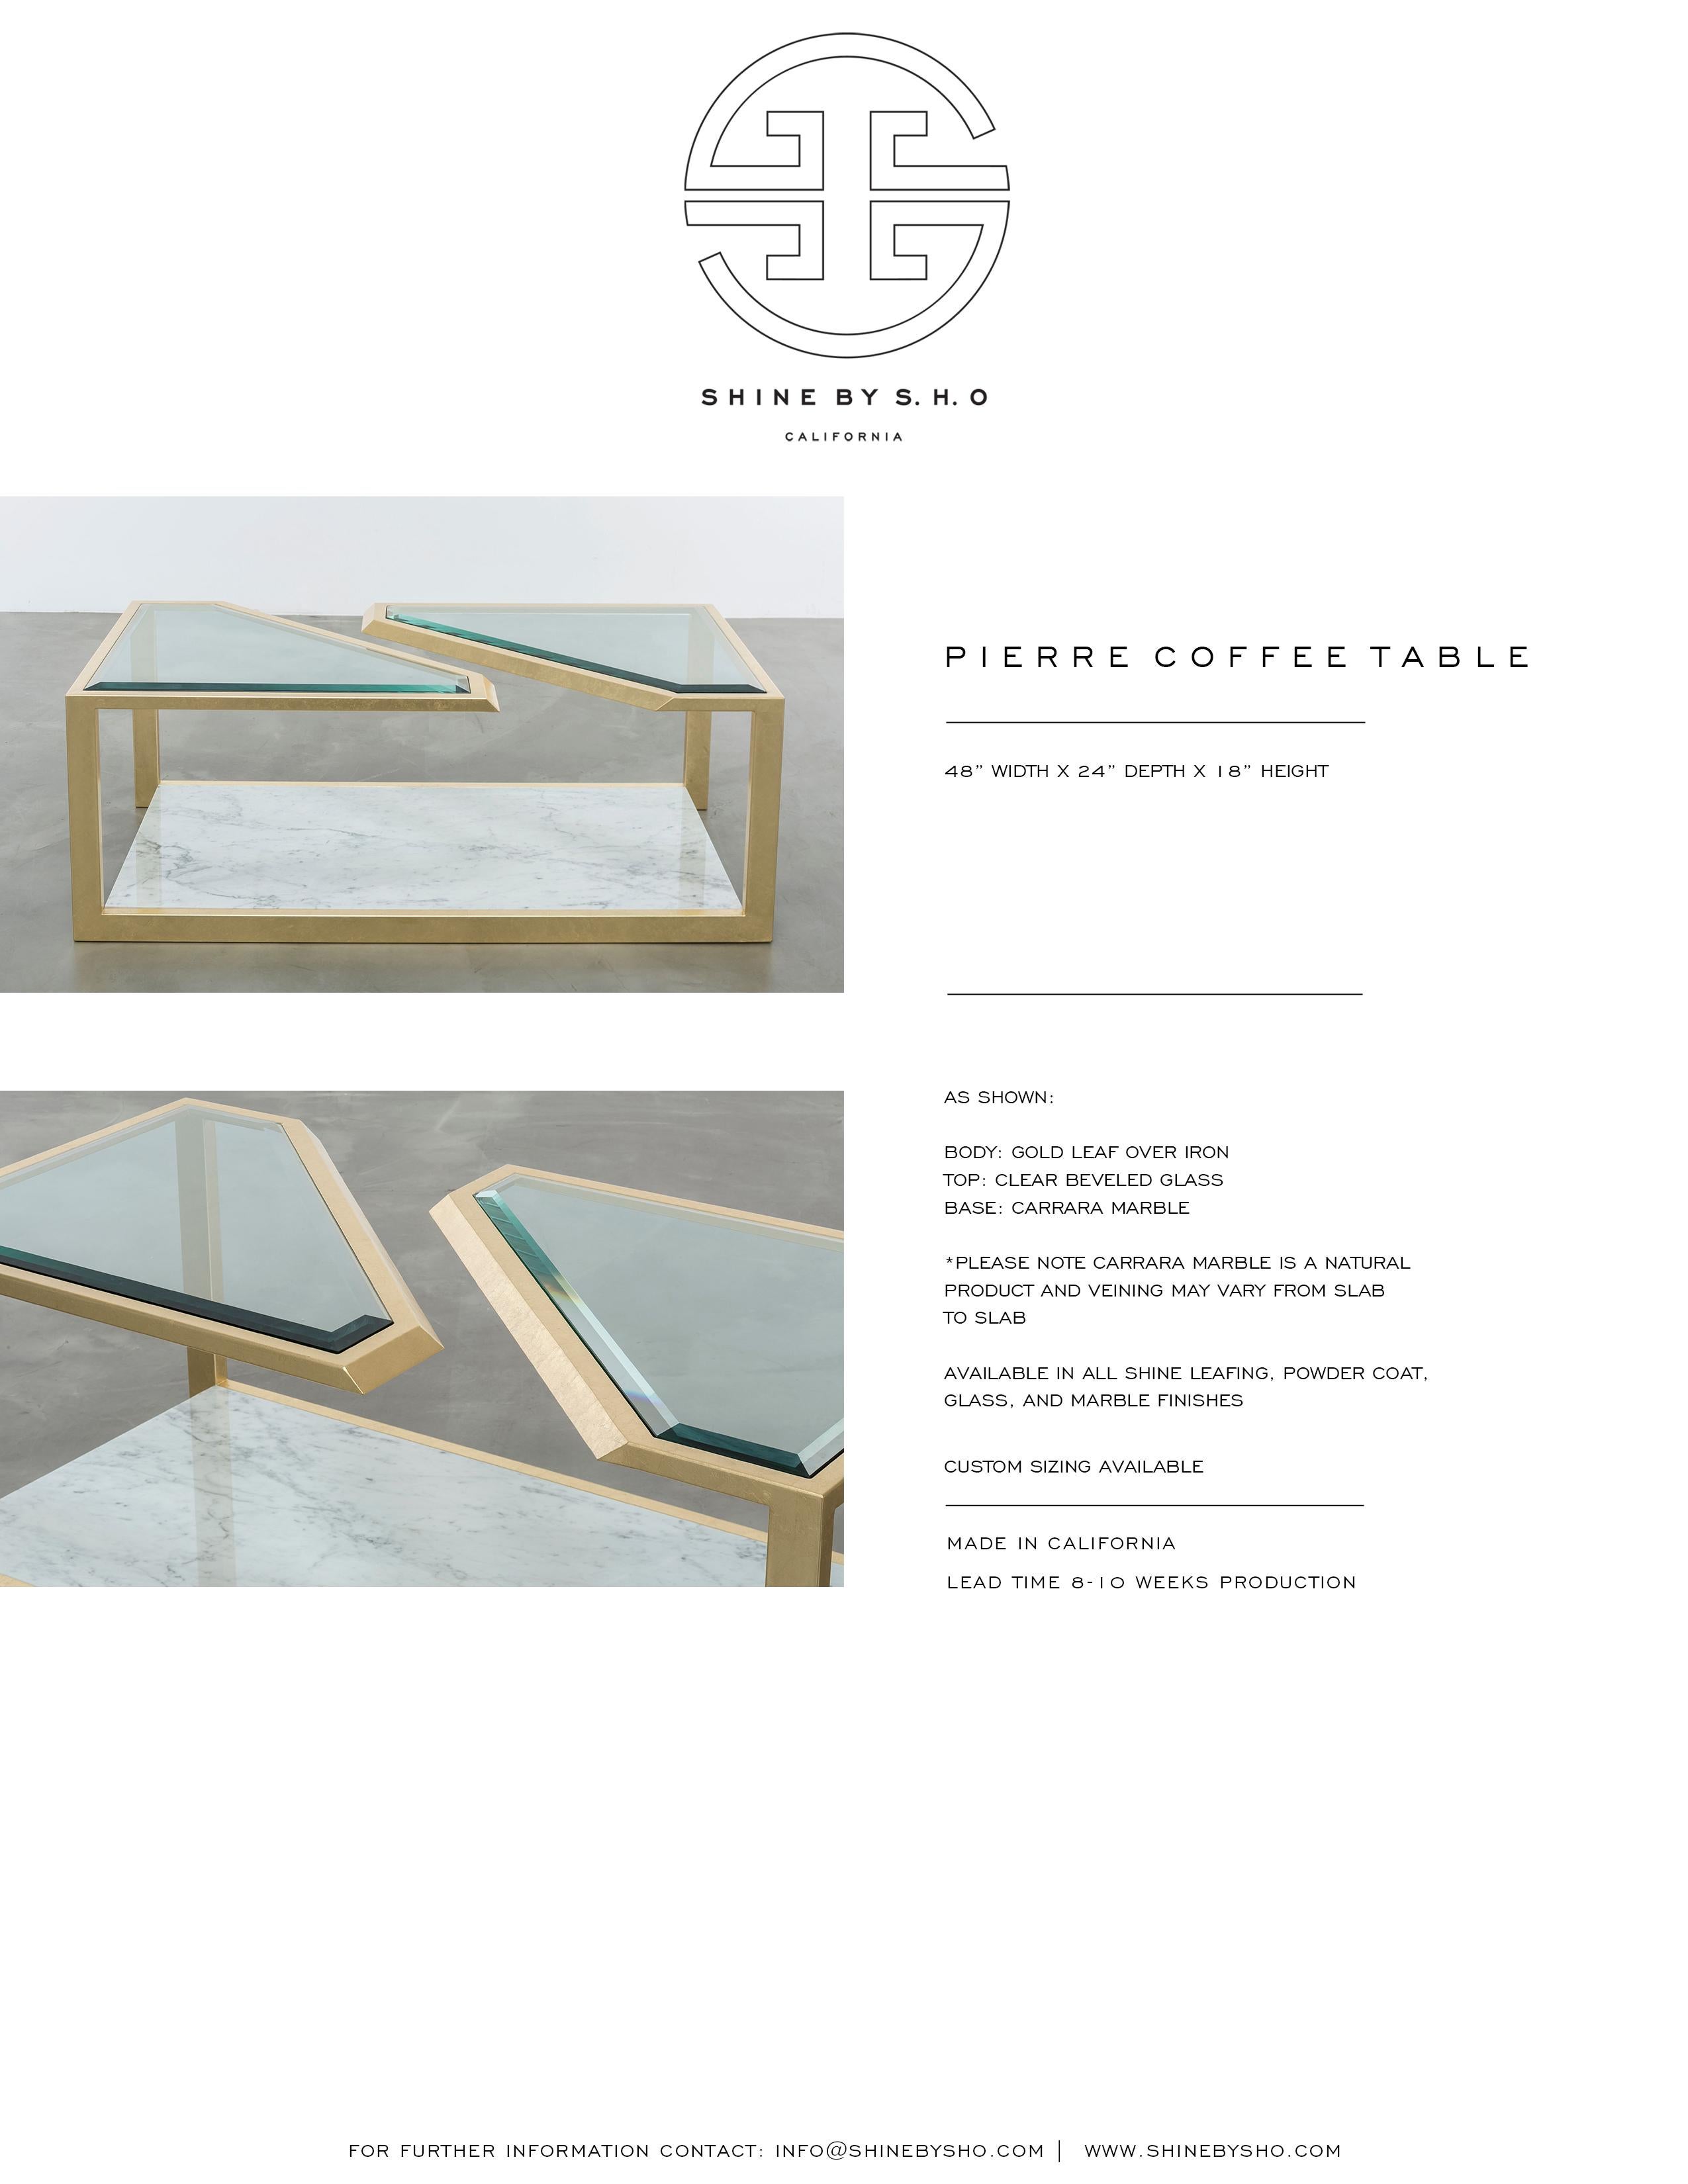 PIERRE COFFEE TABLE - Modern Carrara Marble with Gold Leaf and Beveled Glass For Sale 2